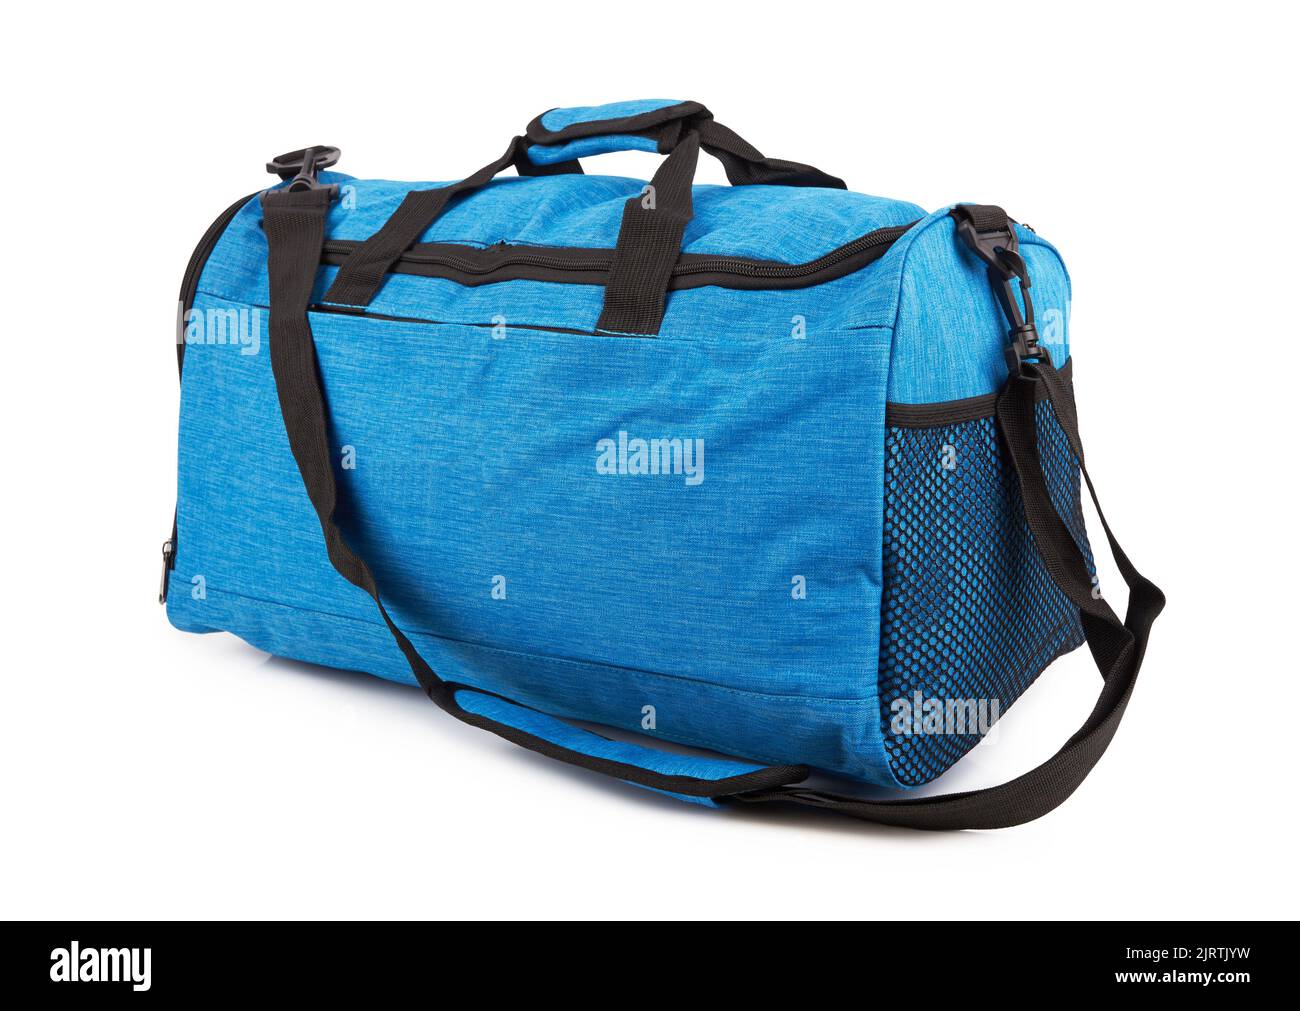 Sport bag isolated on a white background Stock Photo